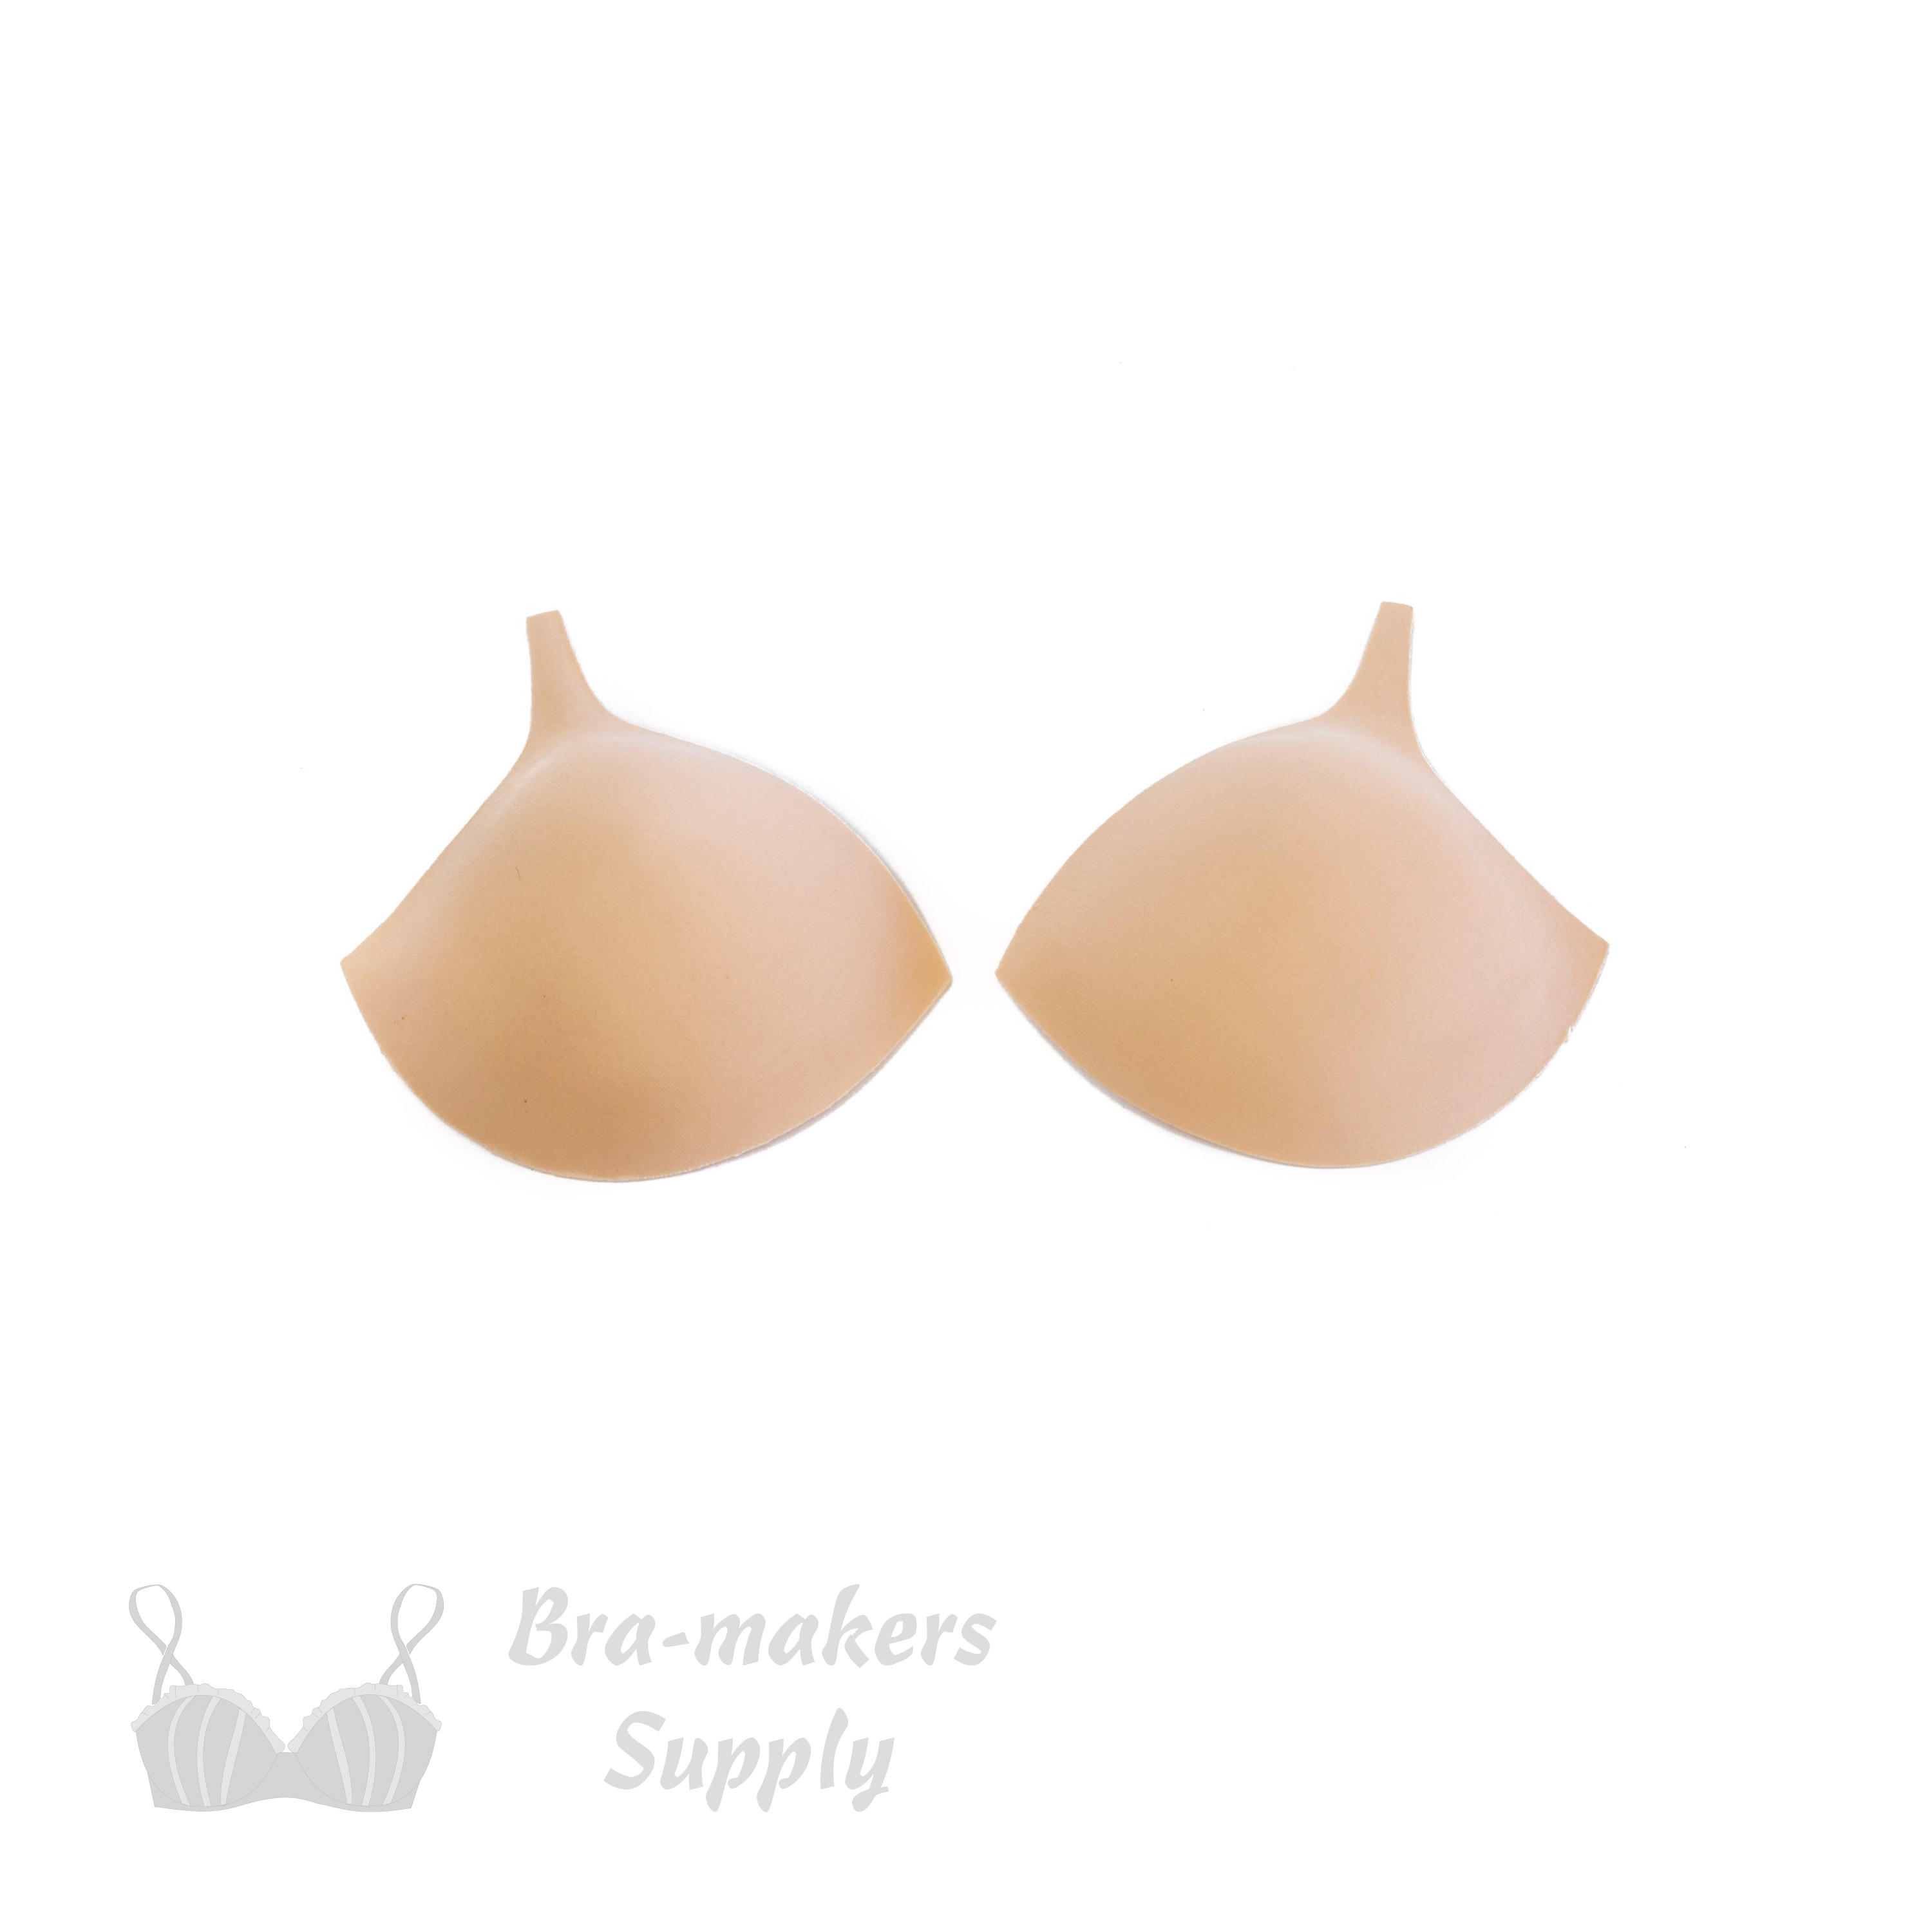 Wholesale bra cup size 32 For Supportive Underwear 